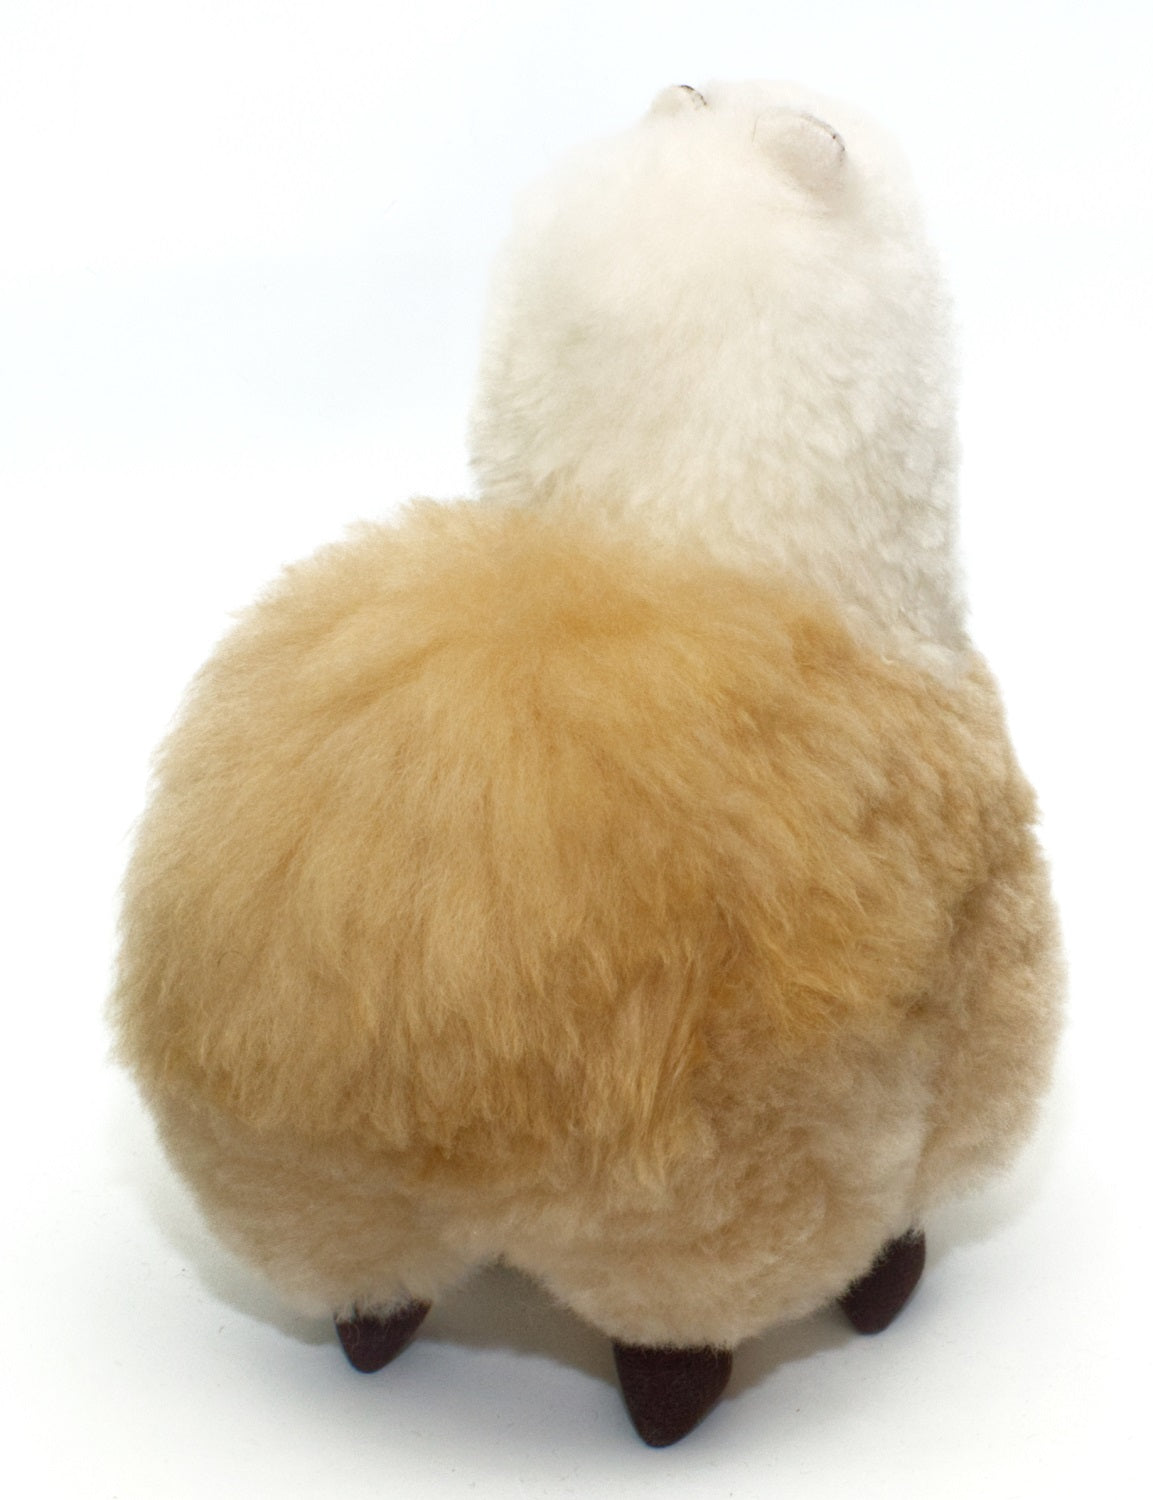 Alpaca Fur Toy. Soft Alpaca Plush. Fluffy and Cuddly. (9 inches, Beige and White)